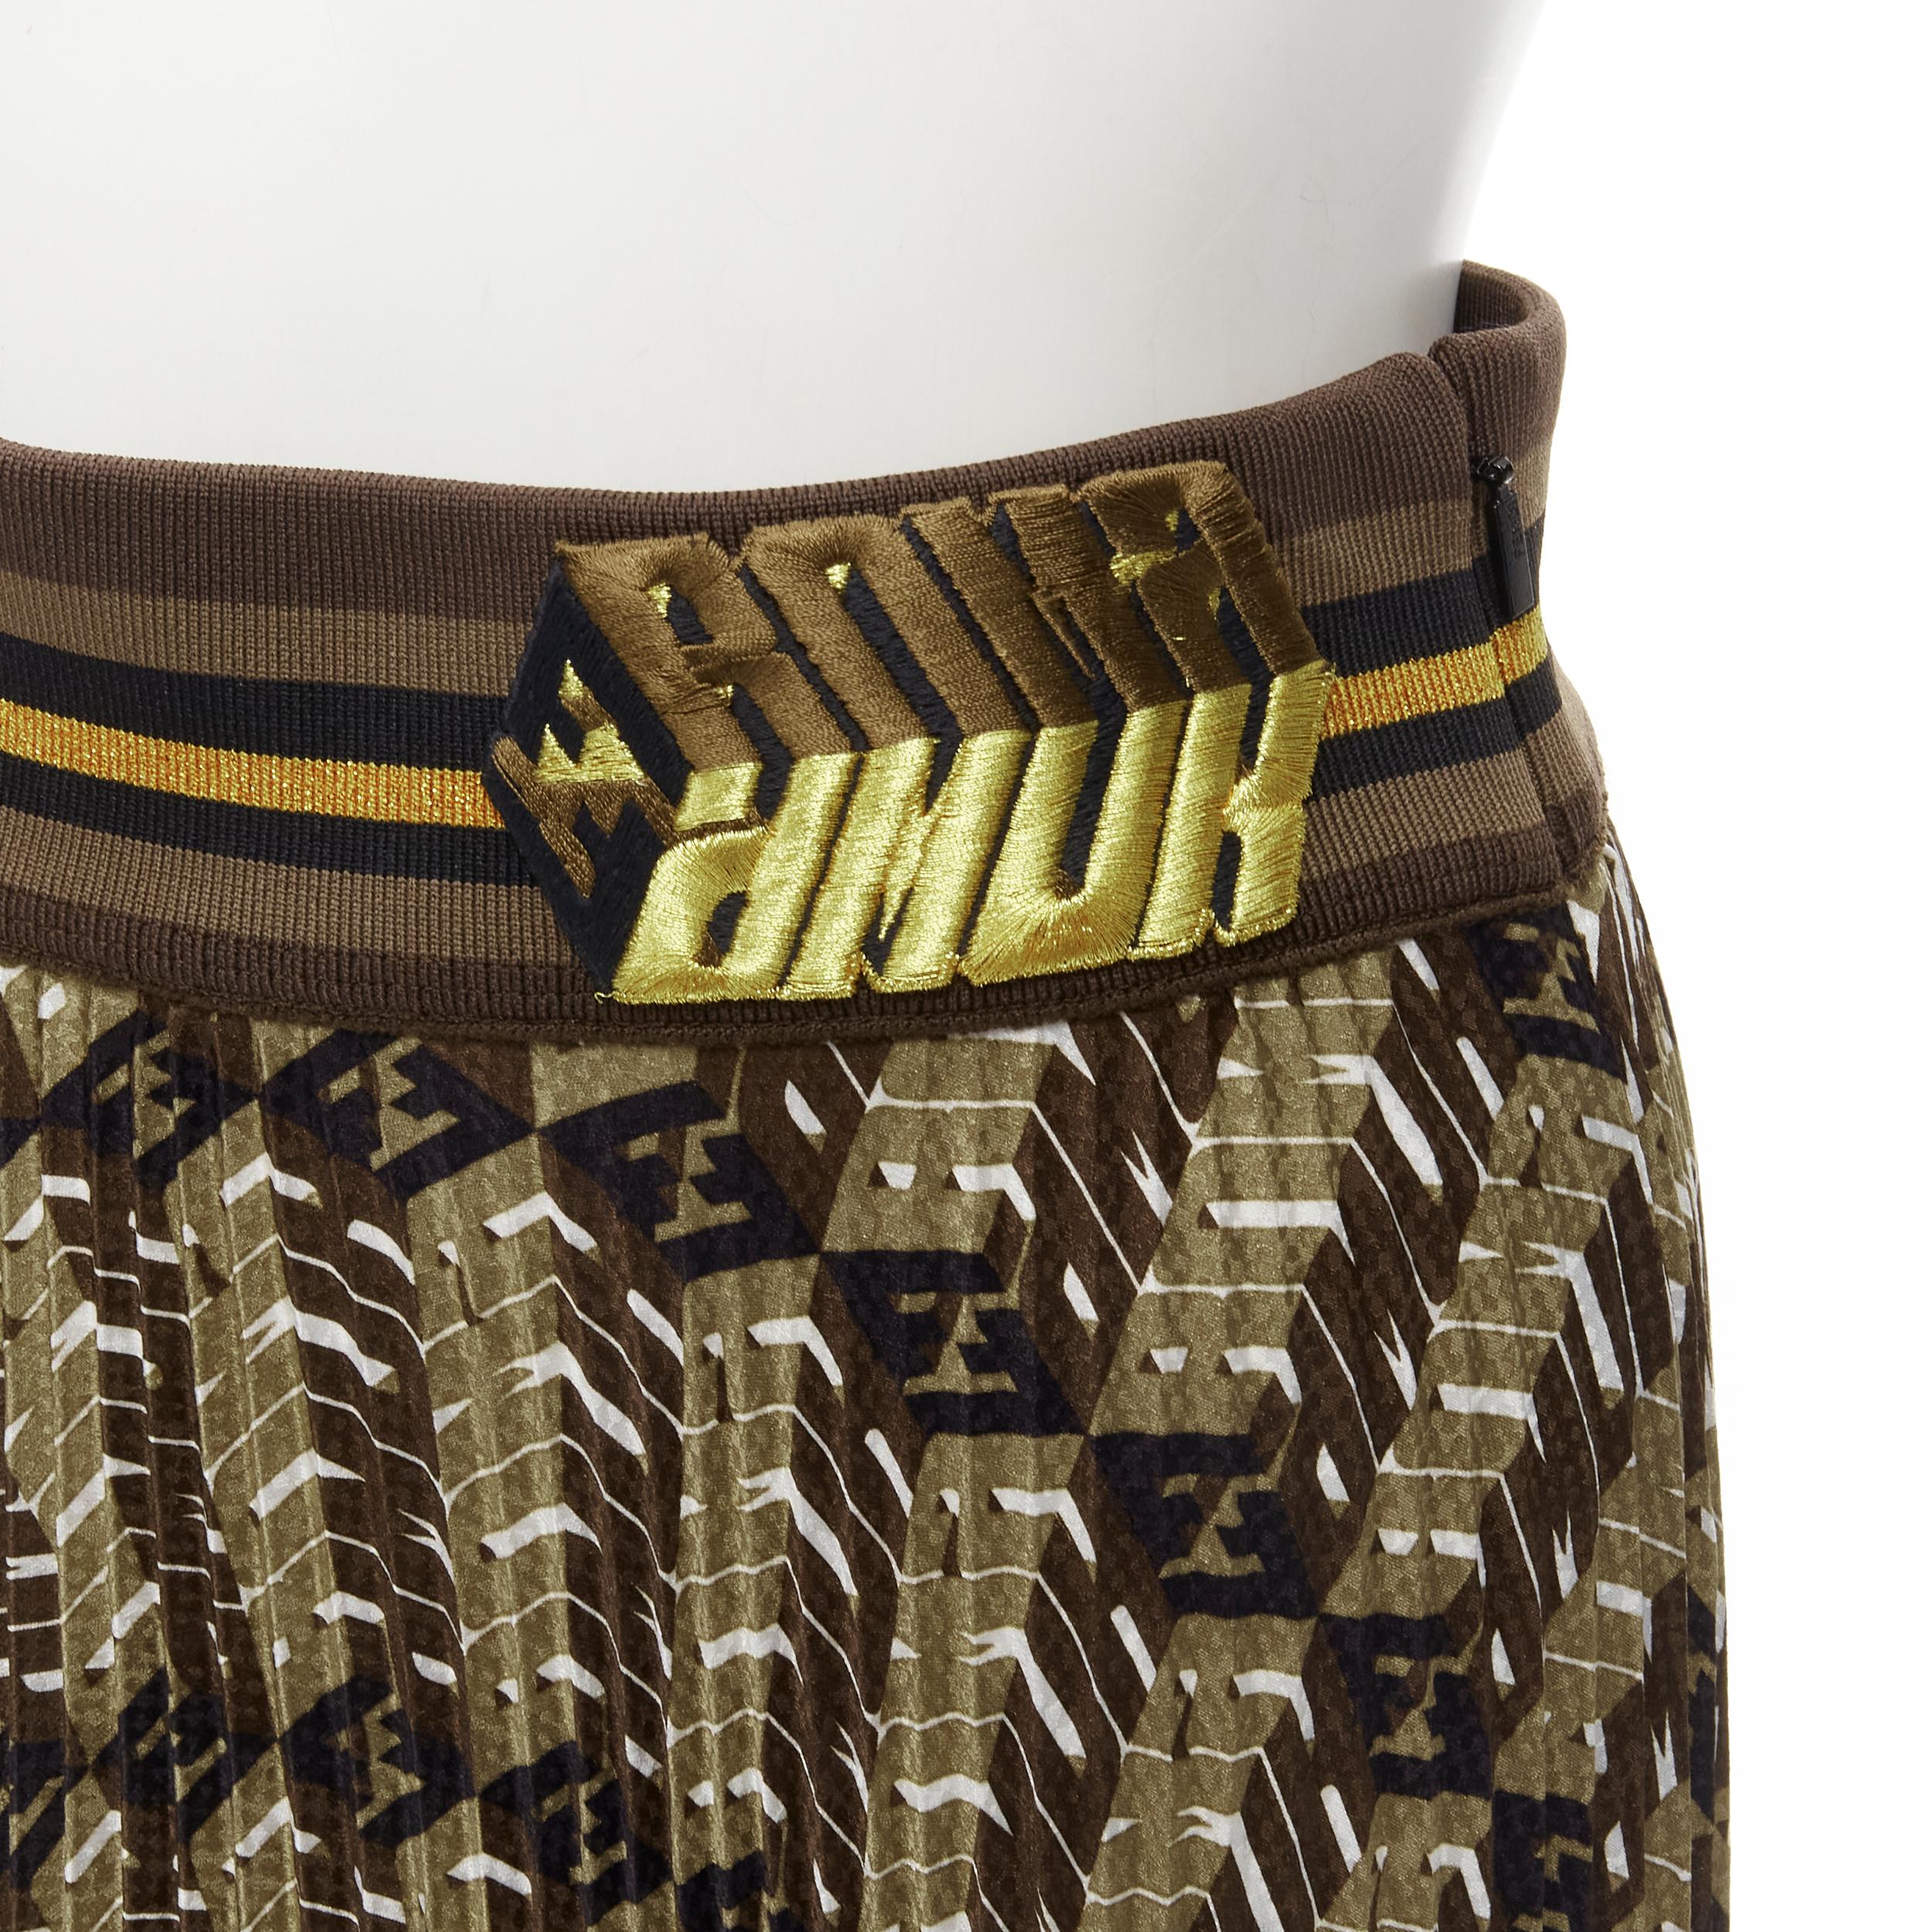 FENDI Roma Amor brown gold graphic print pleated plisse silk skirt IT42 M
Brand: Fendi
Collection: Roma Amor 
Material: Silk
Color: Brown
Pattern: Graphic
Closure: Zip
Extra Detail: Striped web elasticated waist band with gold graphic embroidery.